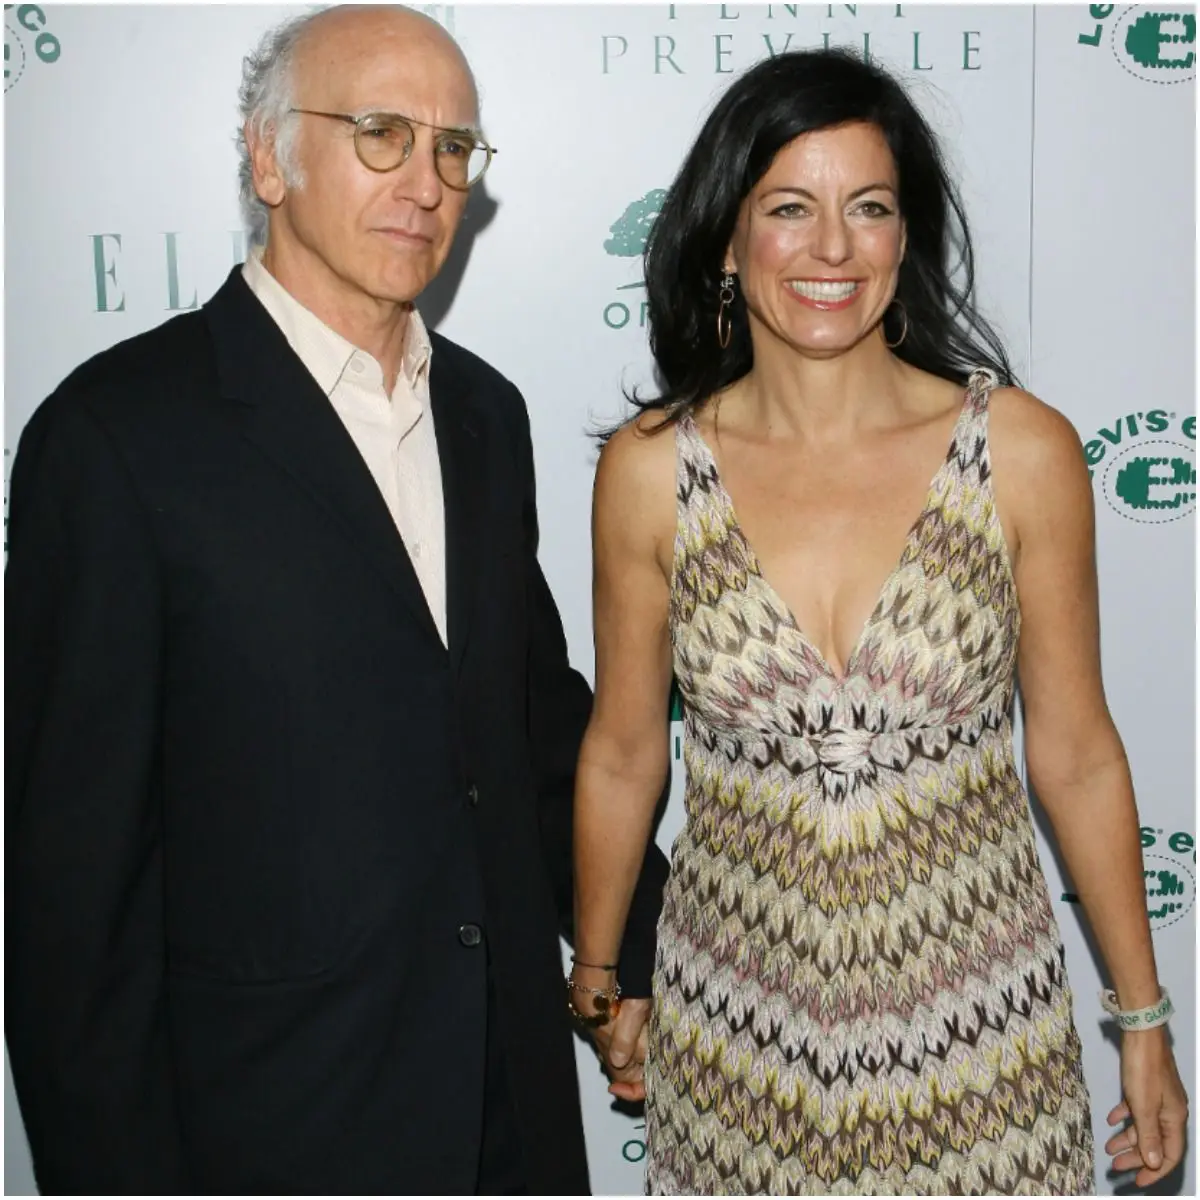 Larry David and wife Laurie David